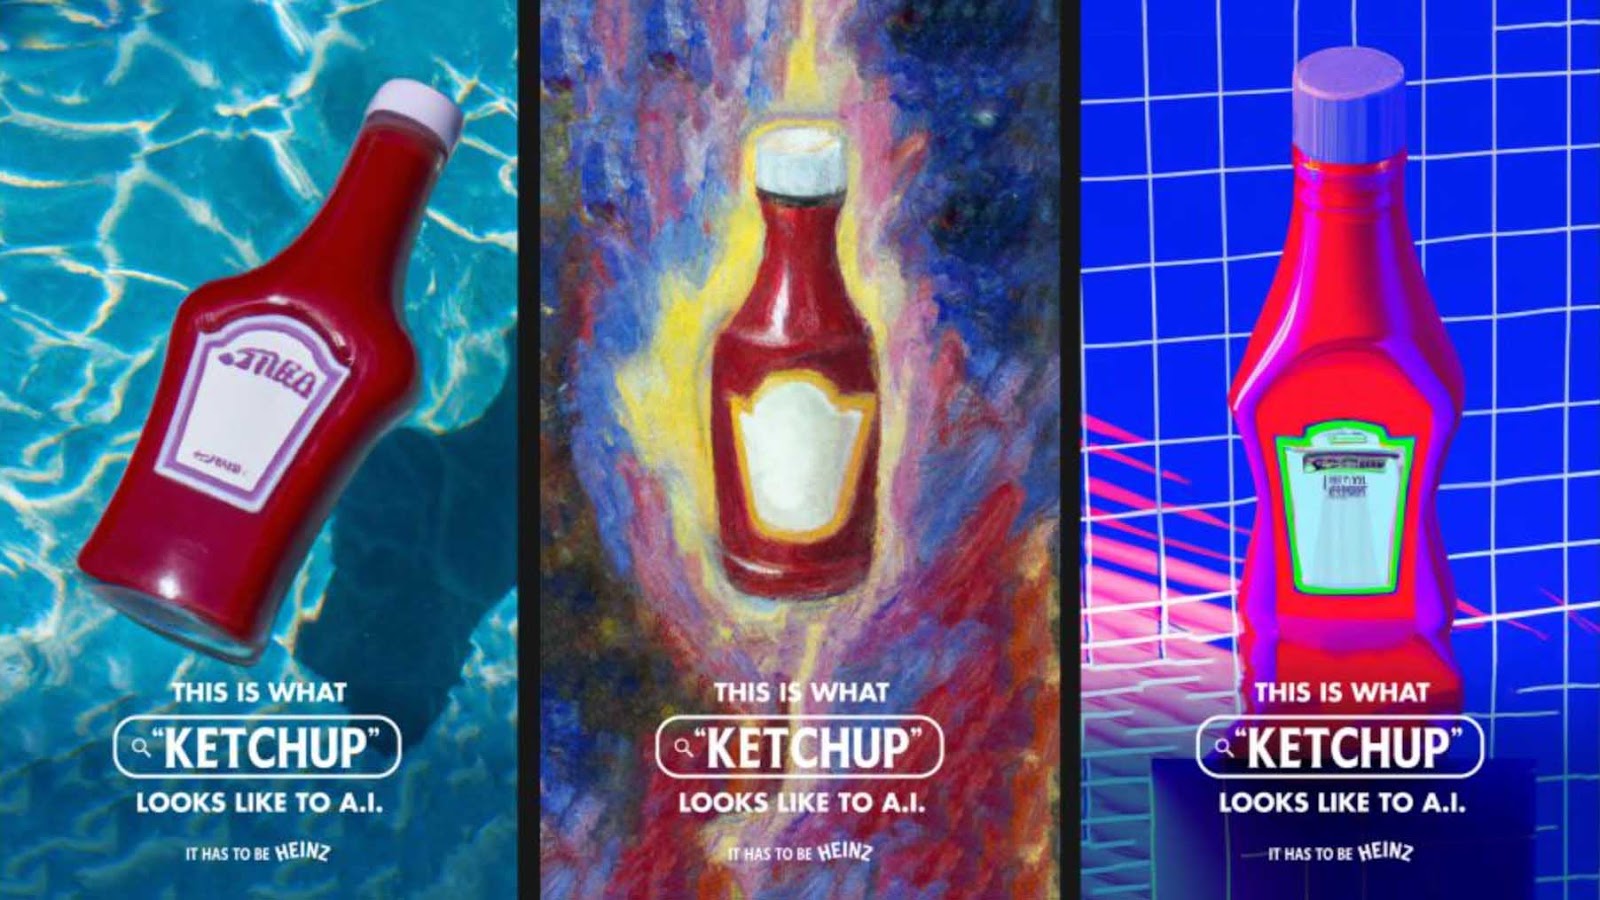 Heinz Ketchup's marketing campaign posters